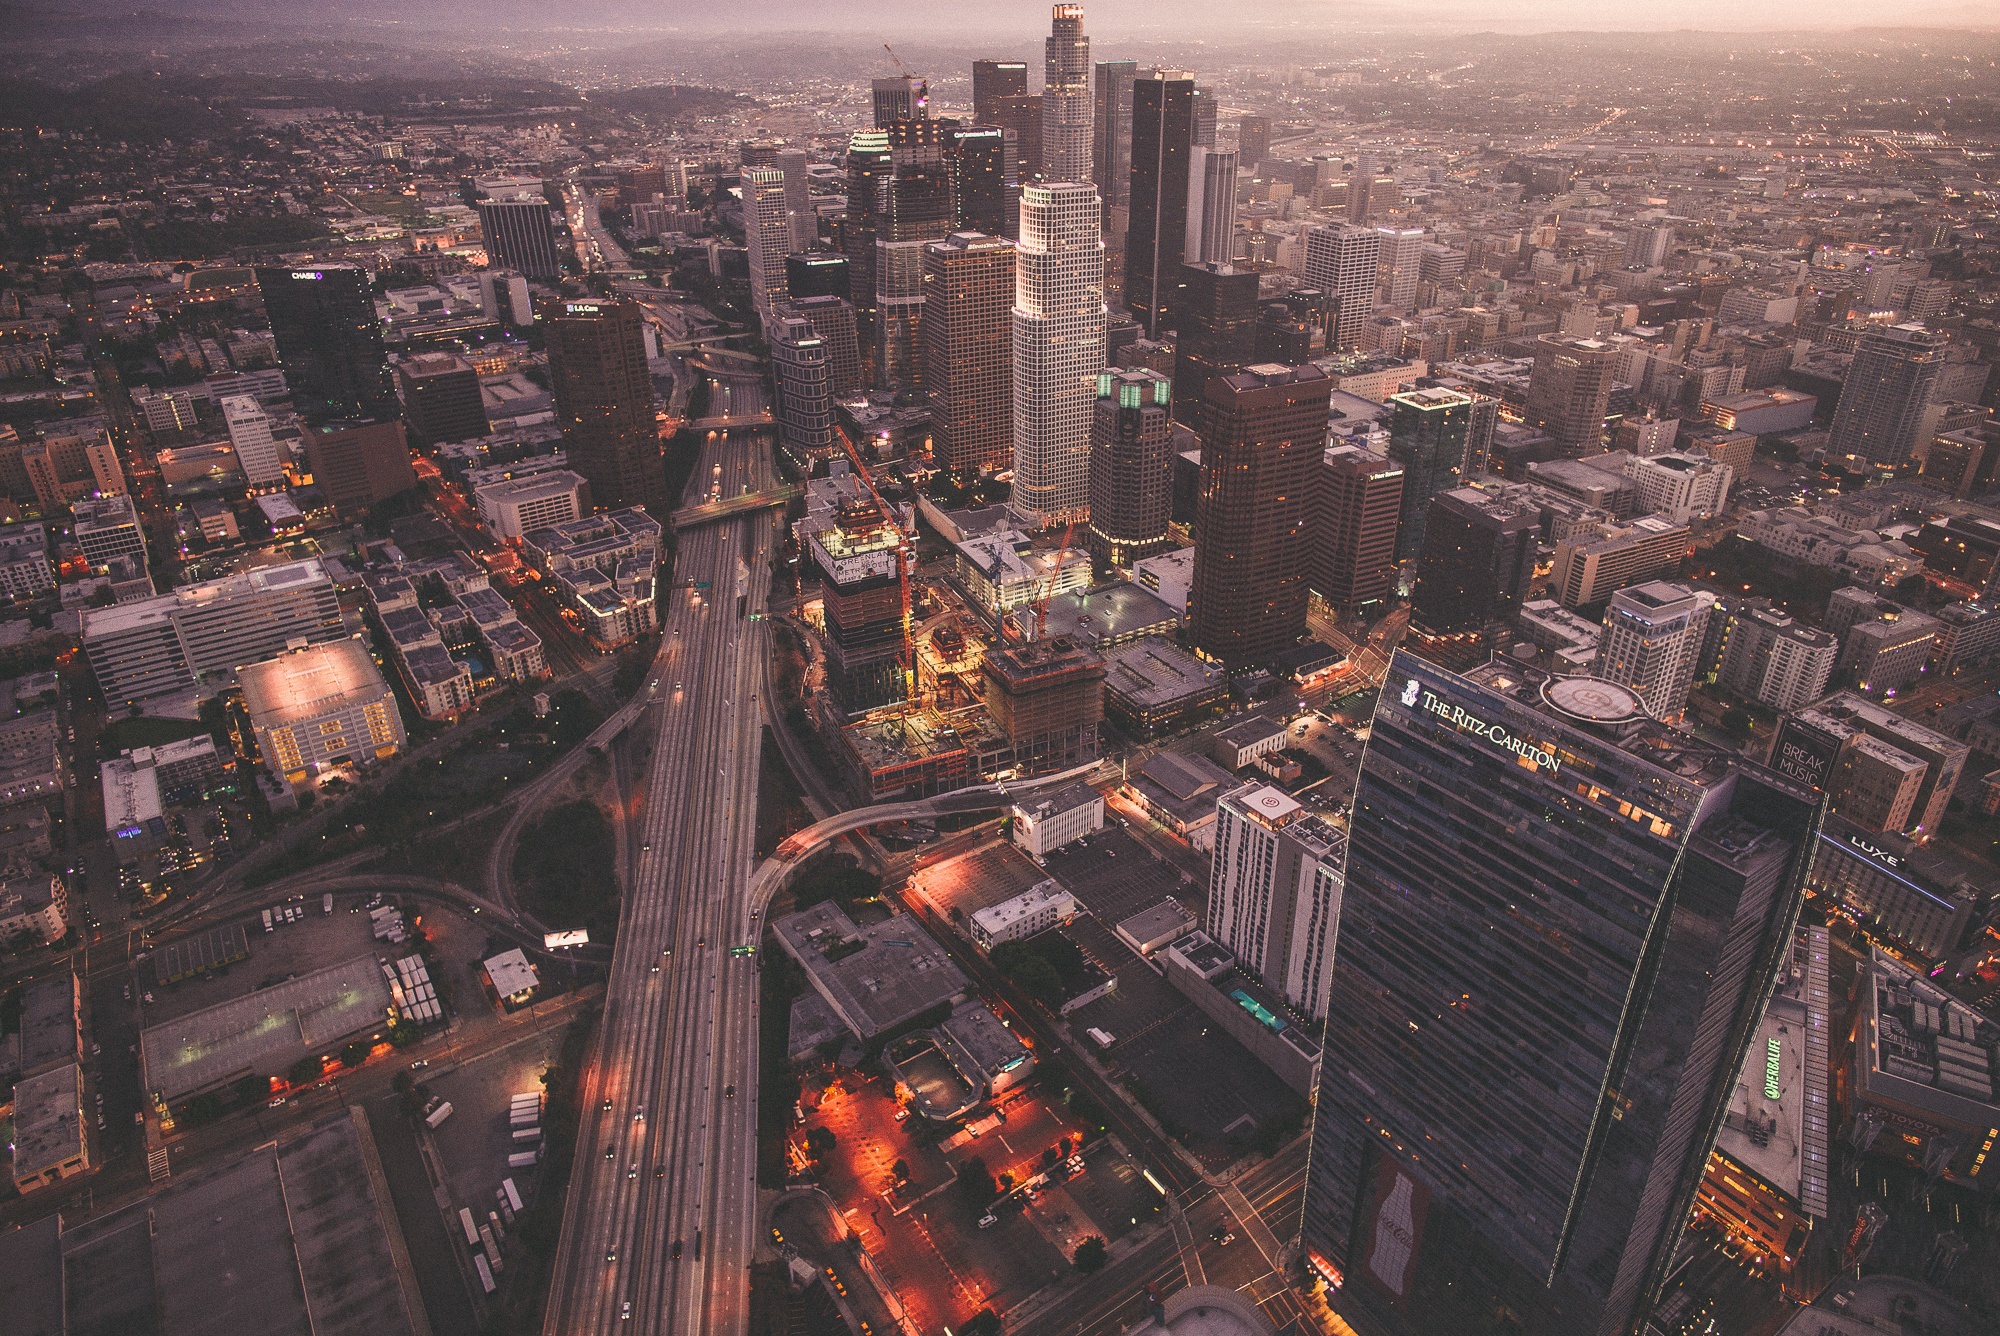 los angeles, usa, man made, aerial, building, city, cityscape, highway, skyscraper, cities